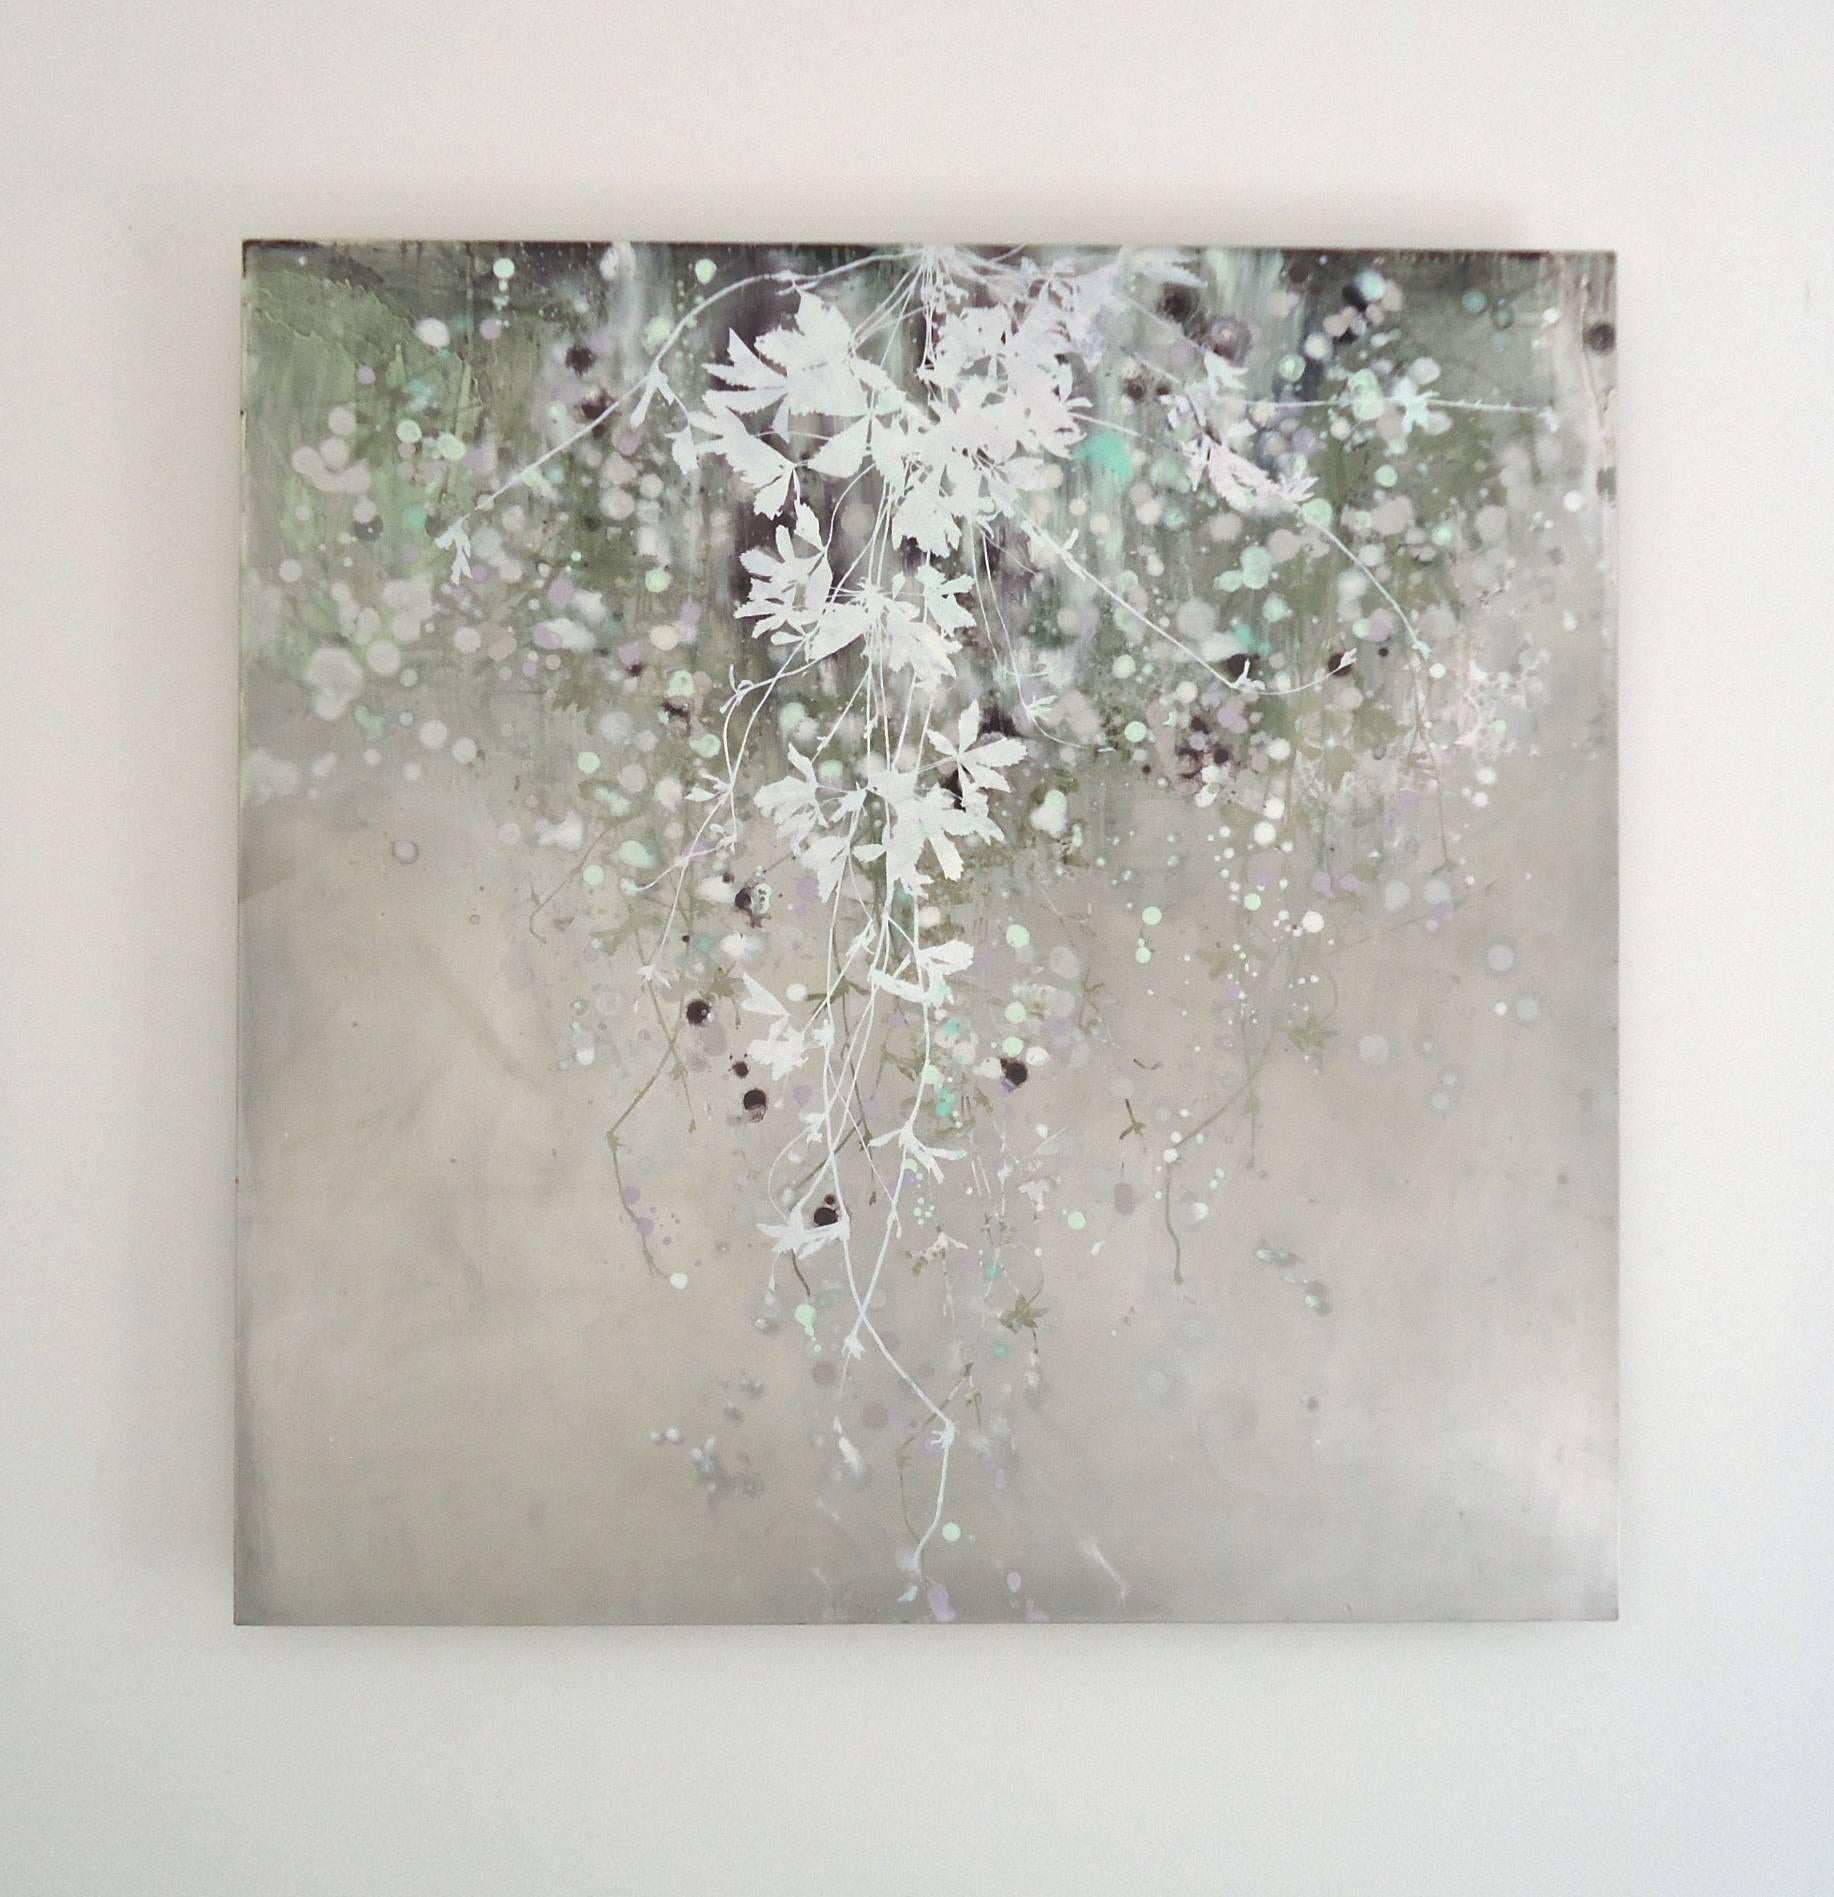 This painting on sanded/ brushed aluminum panel floats 7/8